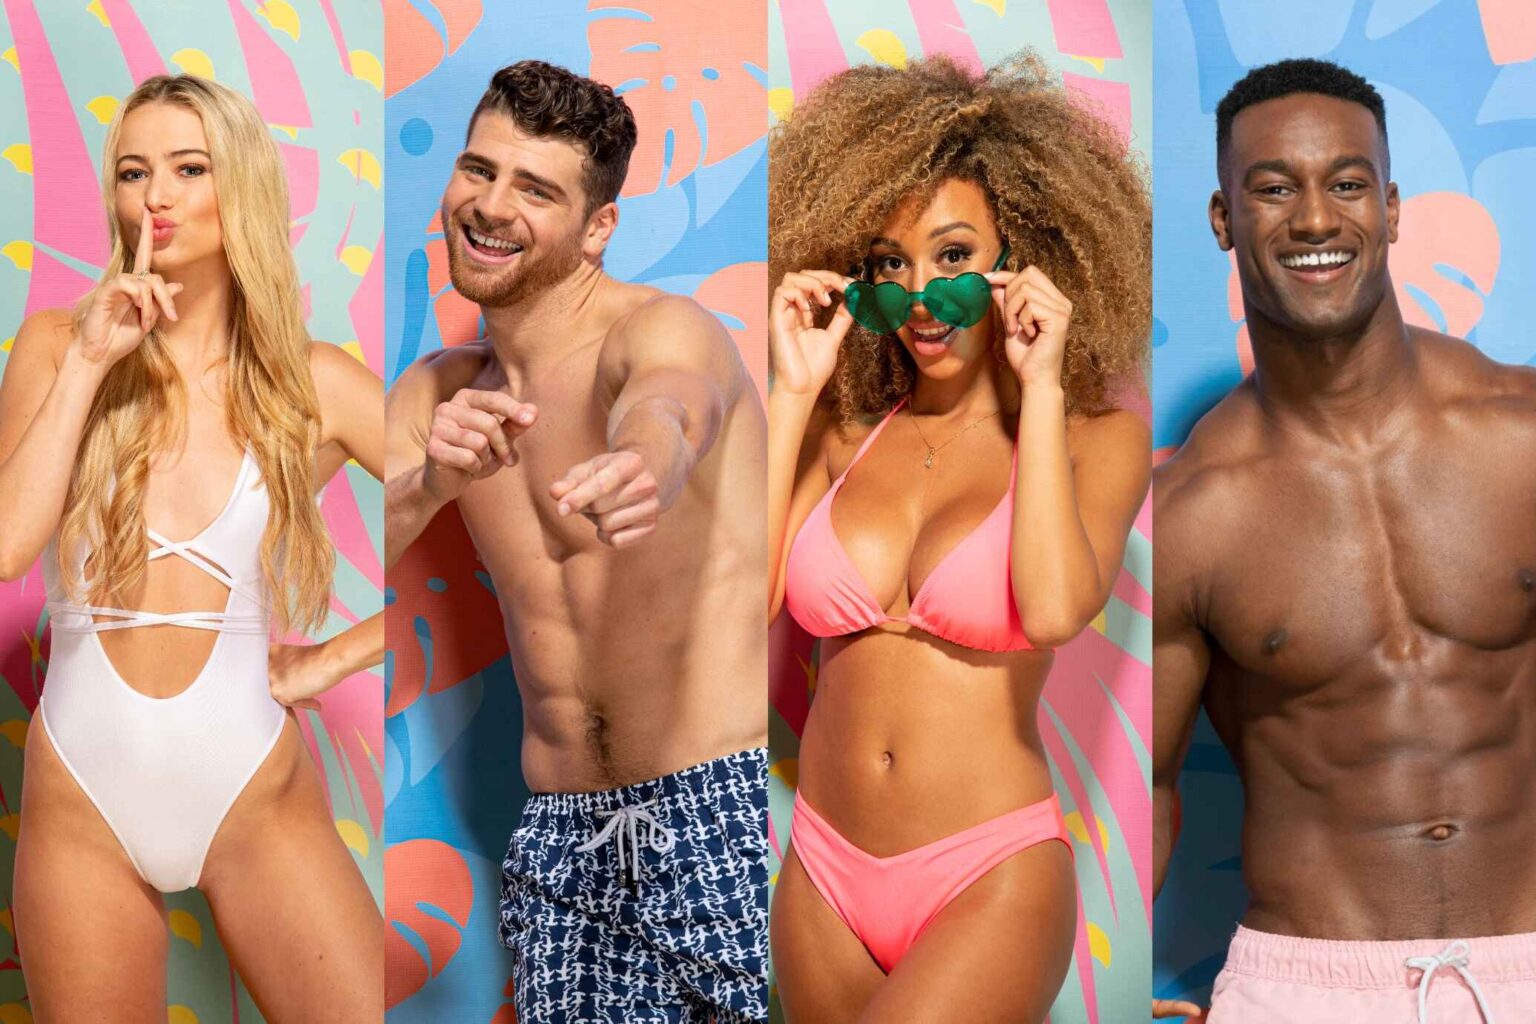 'Love Island' season 2 has announced who their cast is going to be. Here's everything you need to know about the new islanders.